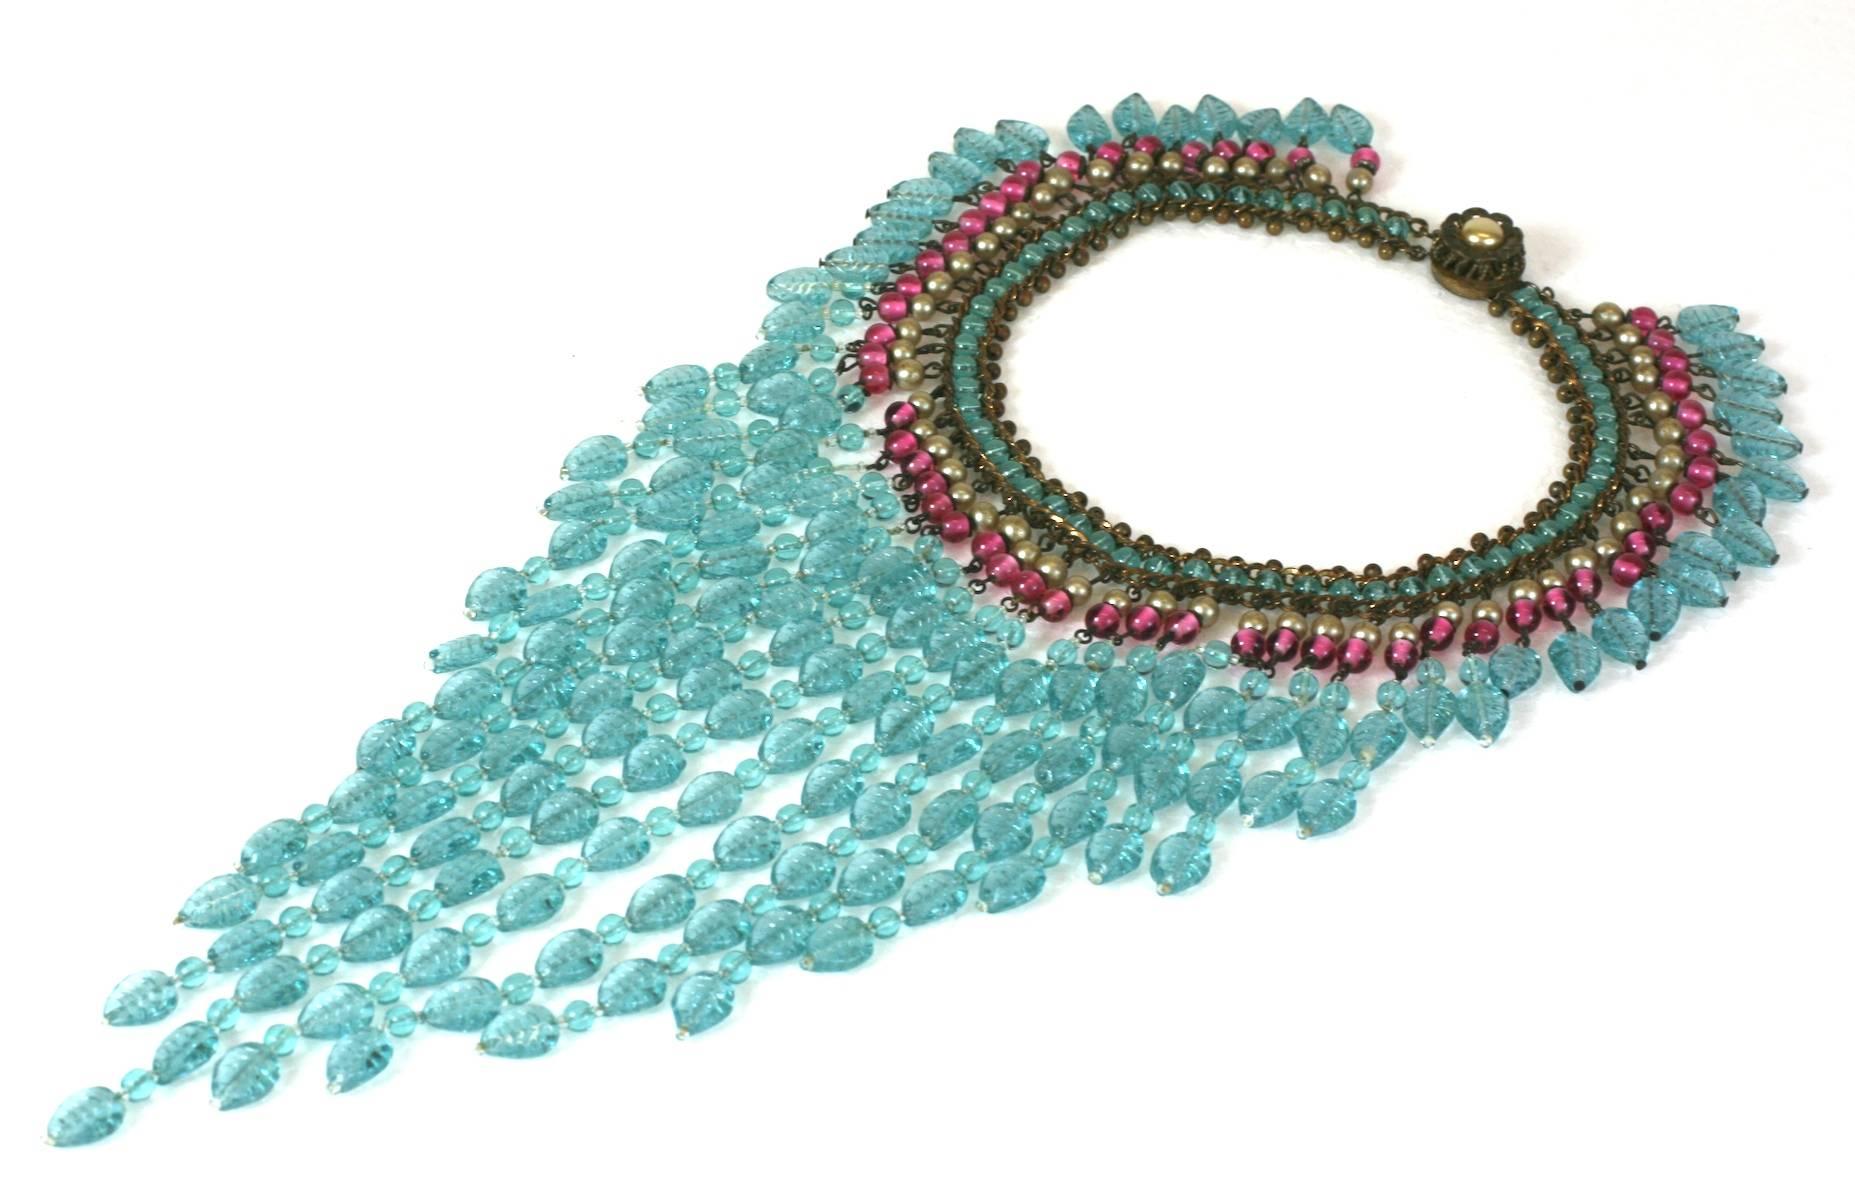 Early Miriam Haskell Bib Necklace in the Indian style, popular in the late 1930's, composed of faux pearls, pate de verre ruby beads, and faux carved   and incised leaf shaped faux aquamarines.
Unsigned, as many of the early 1930's pieces